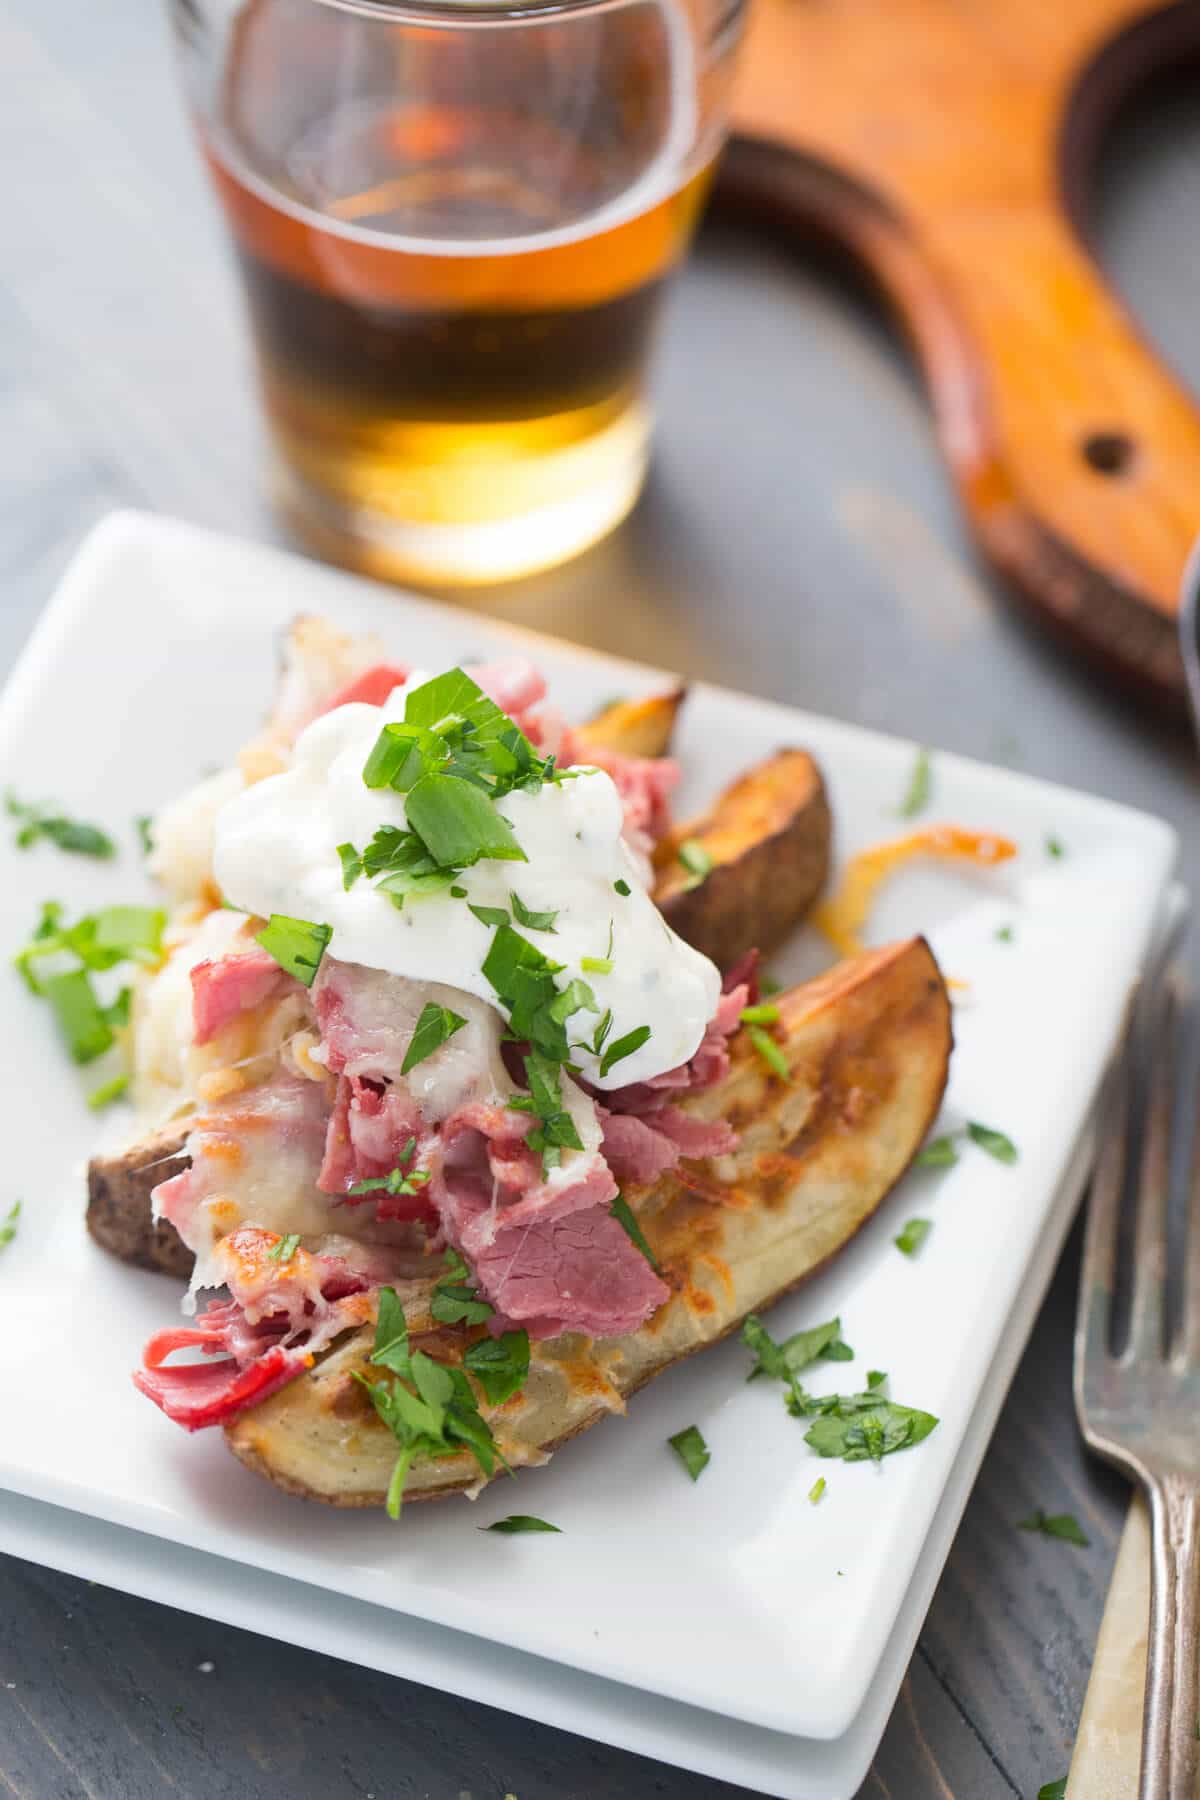 Loaded potatoes recipe the is topped with corned beef, kraut, cheeses and crispy onions! Absolutely delicious!